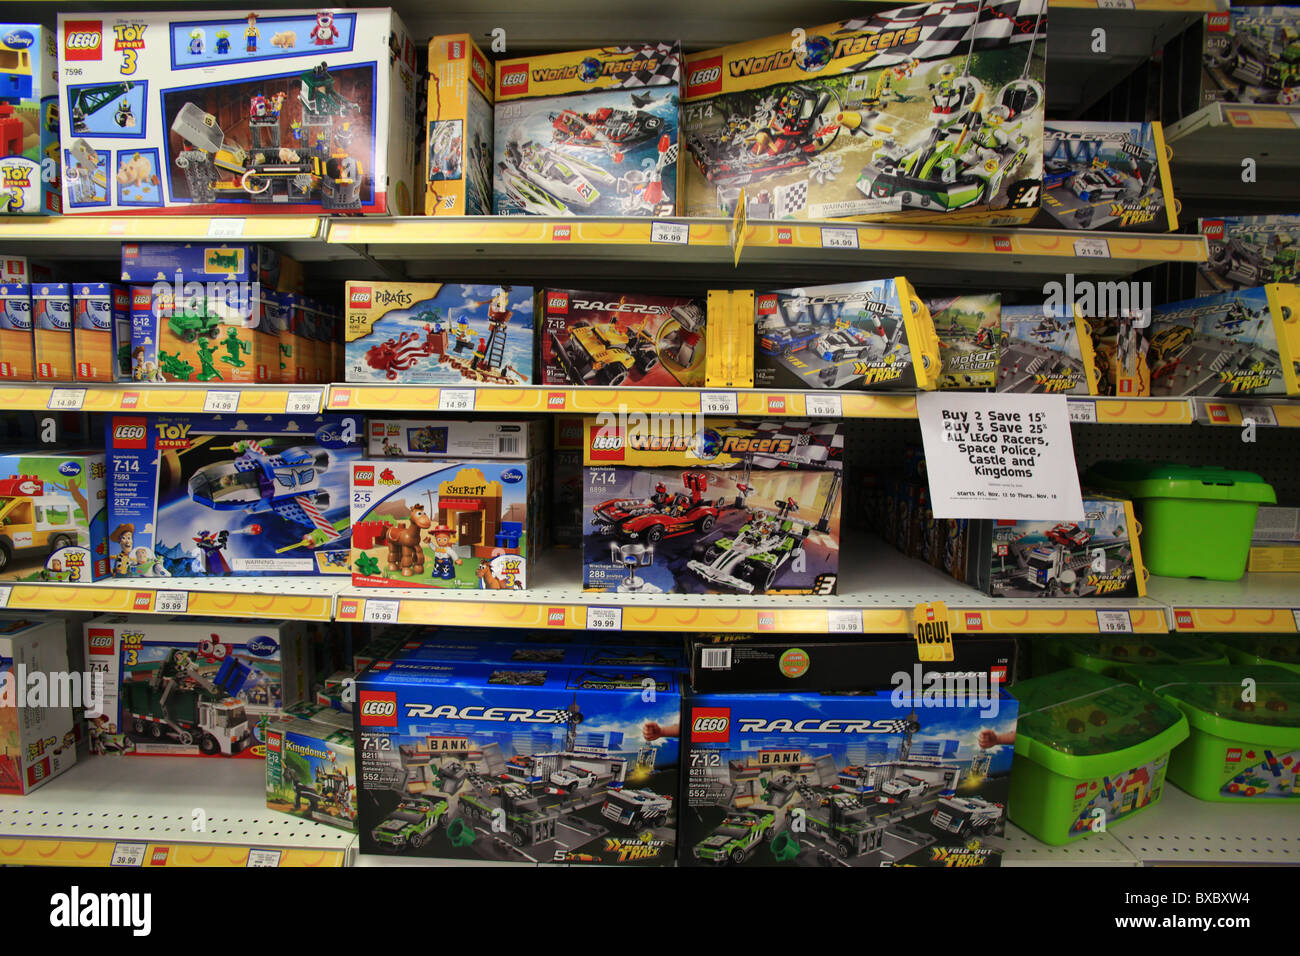 Lego racers for sale in Toys r us store in Ontario Canada Stock Photo